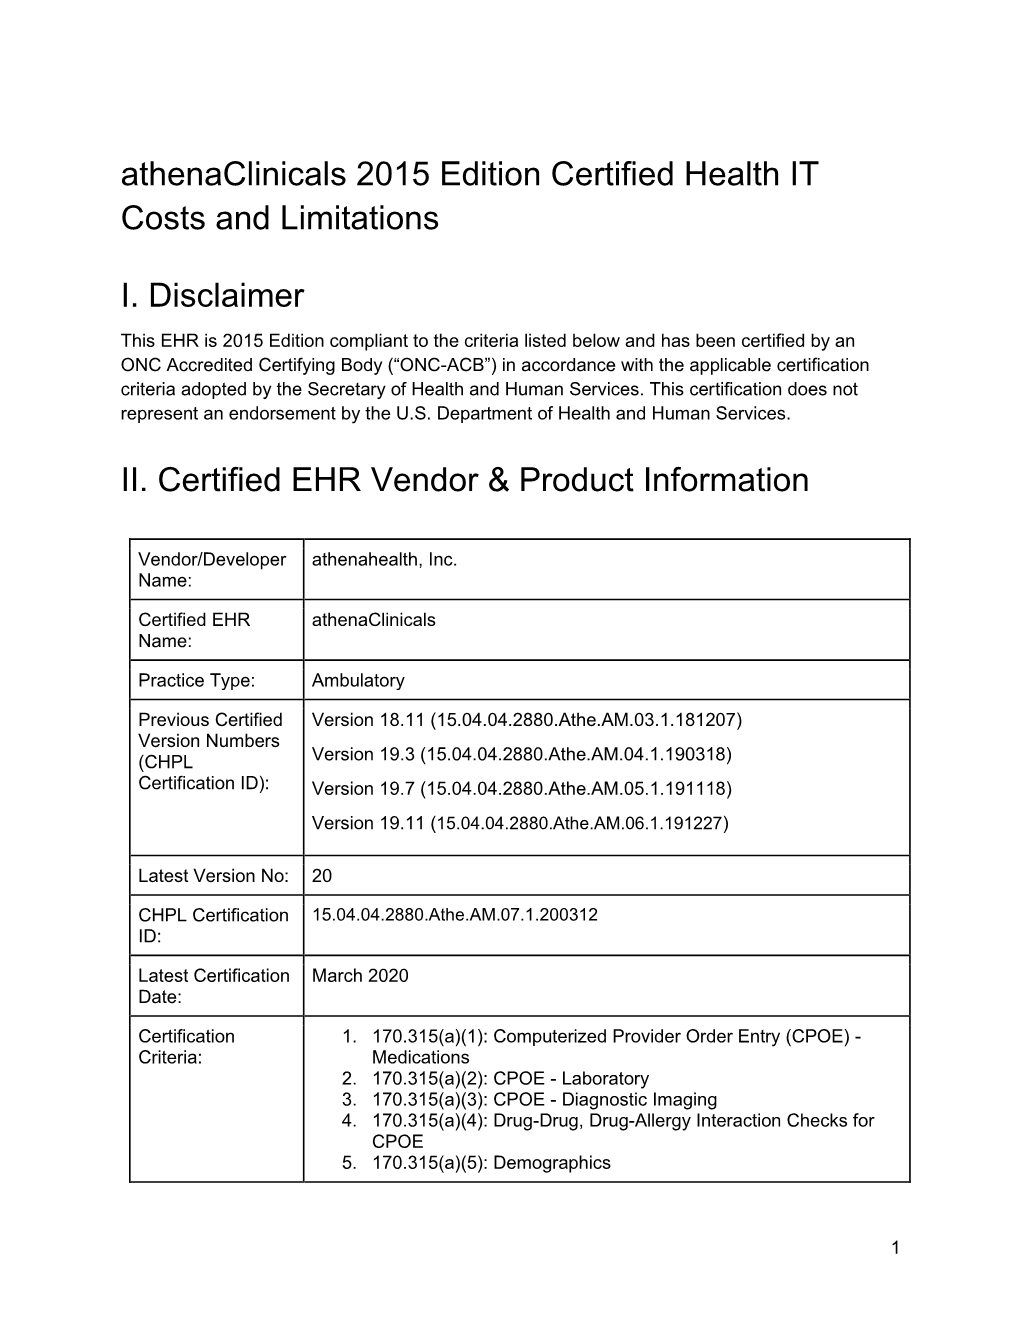 Athenaclinicals 2015 Edition Certified Health IT Costs and Limitations